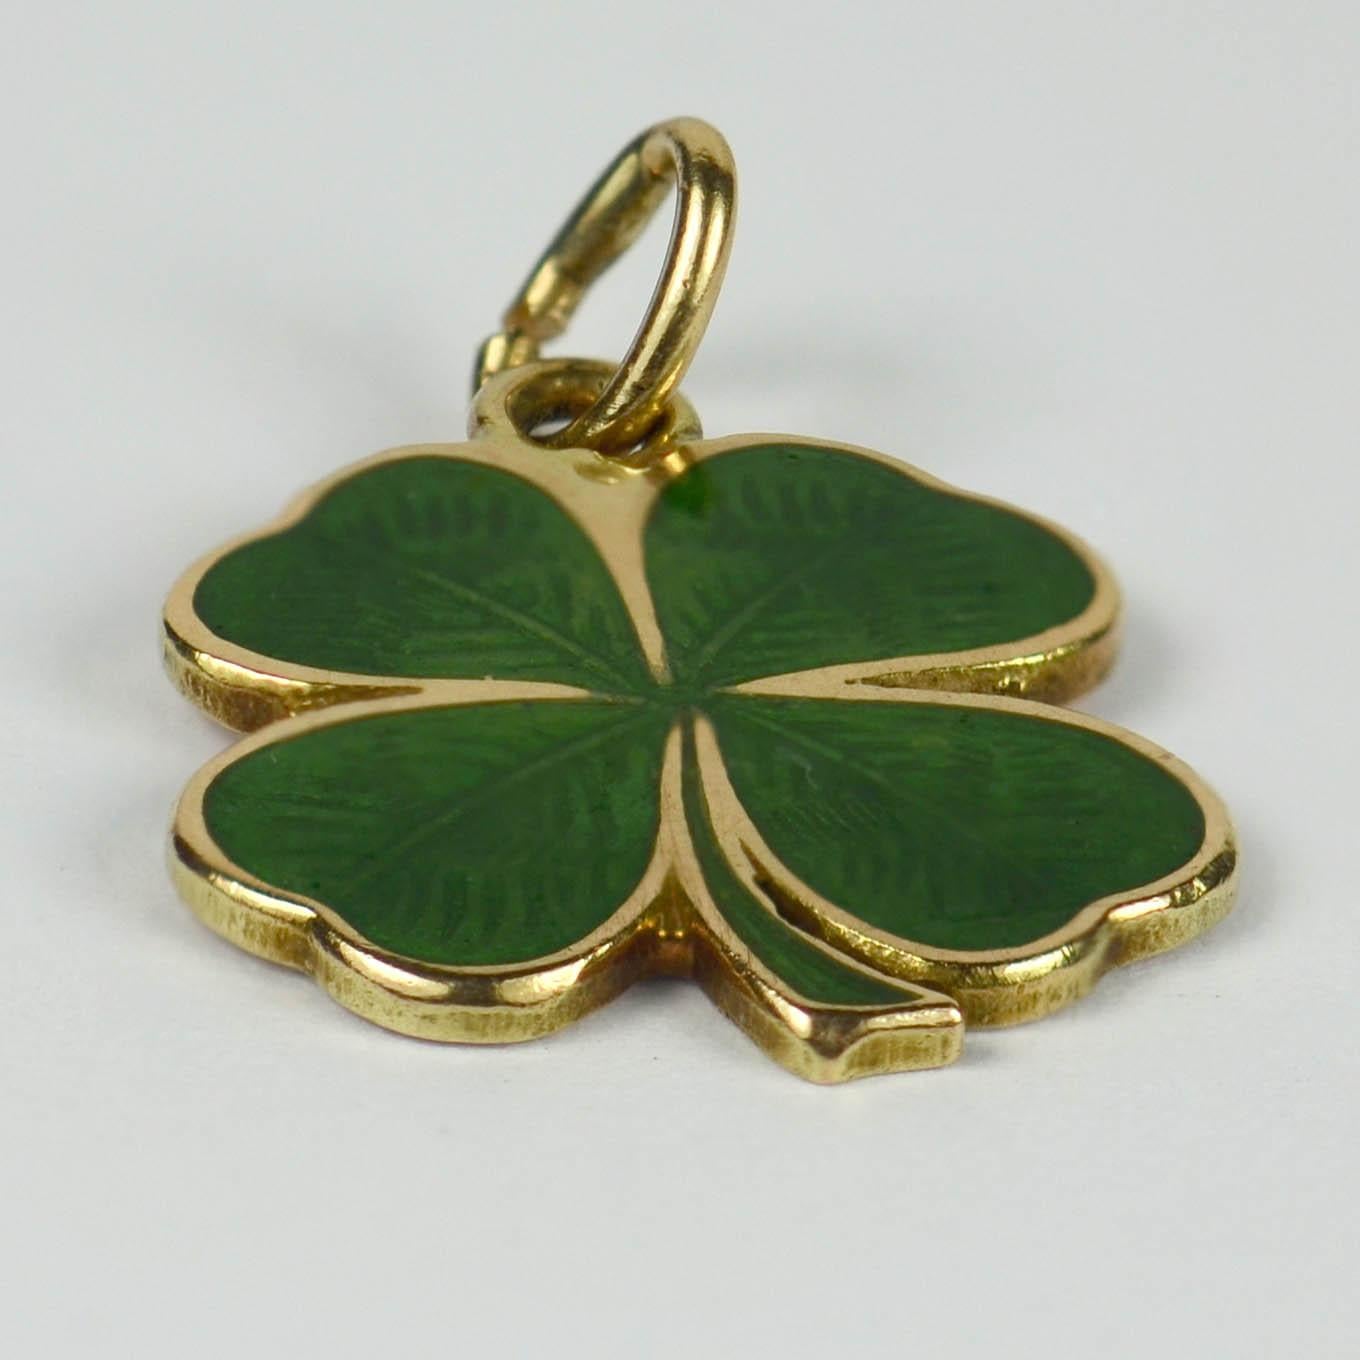 A 14 karat yellow gold charm pendant designed as a lucky four-leaf clover or shamrock with green baisse-taille enamel.
Marked 14K with makers mark for Richardson MFG Co.

Dimensions: 1.6 x 1.2 x 0.1 cm
Weight: 1.13 grams